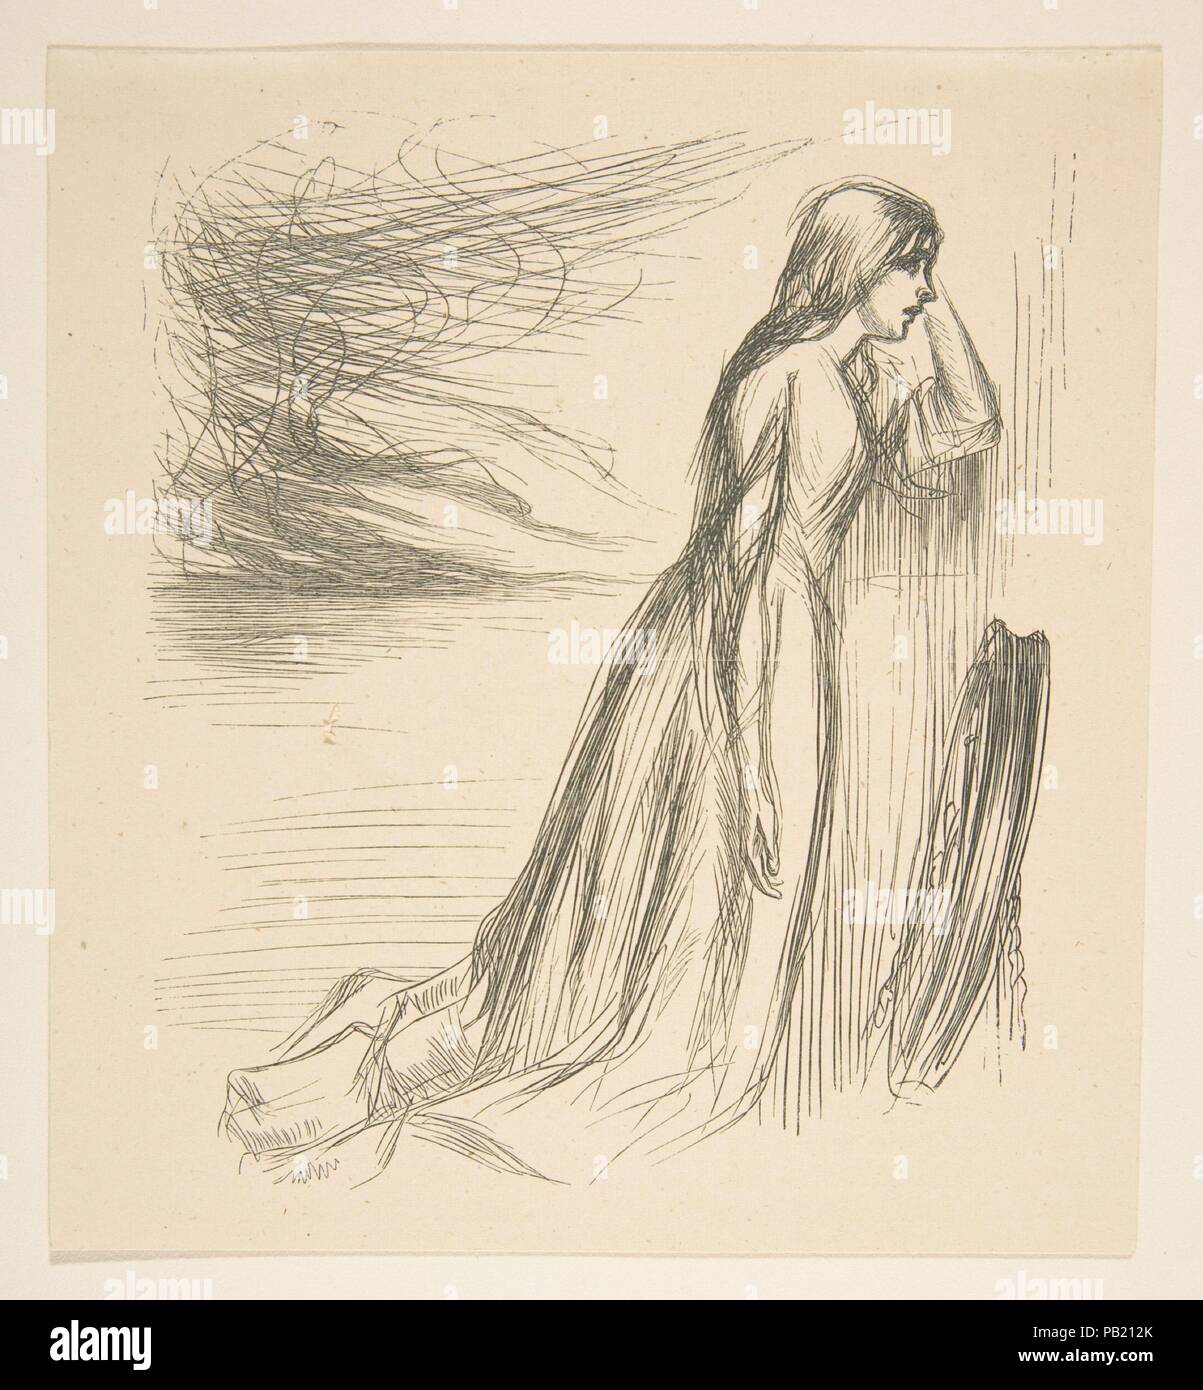 Illustration to 'The Relief Fund in Lancashire' (Once a Week). Artist: After James McNeill Whistler (American, Lowell, Massachusetts 1834-1903 London). Date: 1862. Museum: Metropolitan Museum of Art, New York, USA. Stock Photo